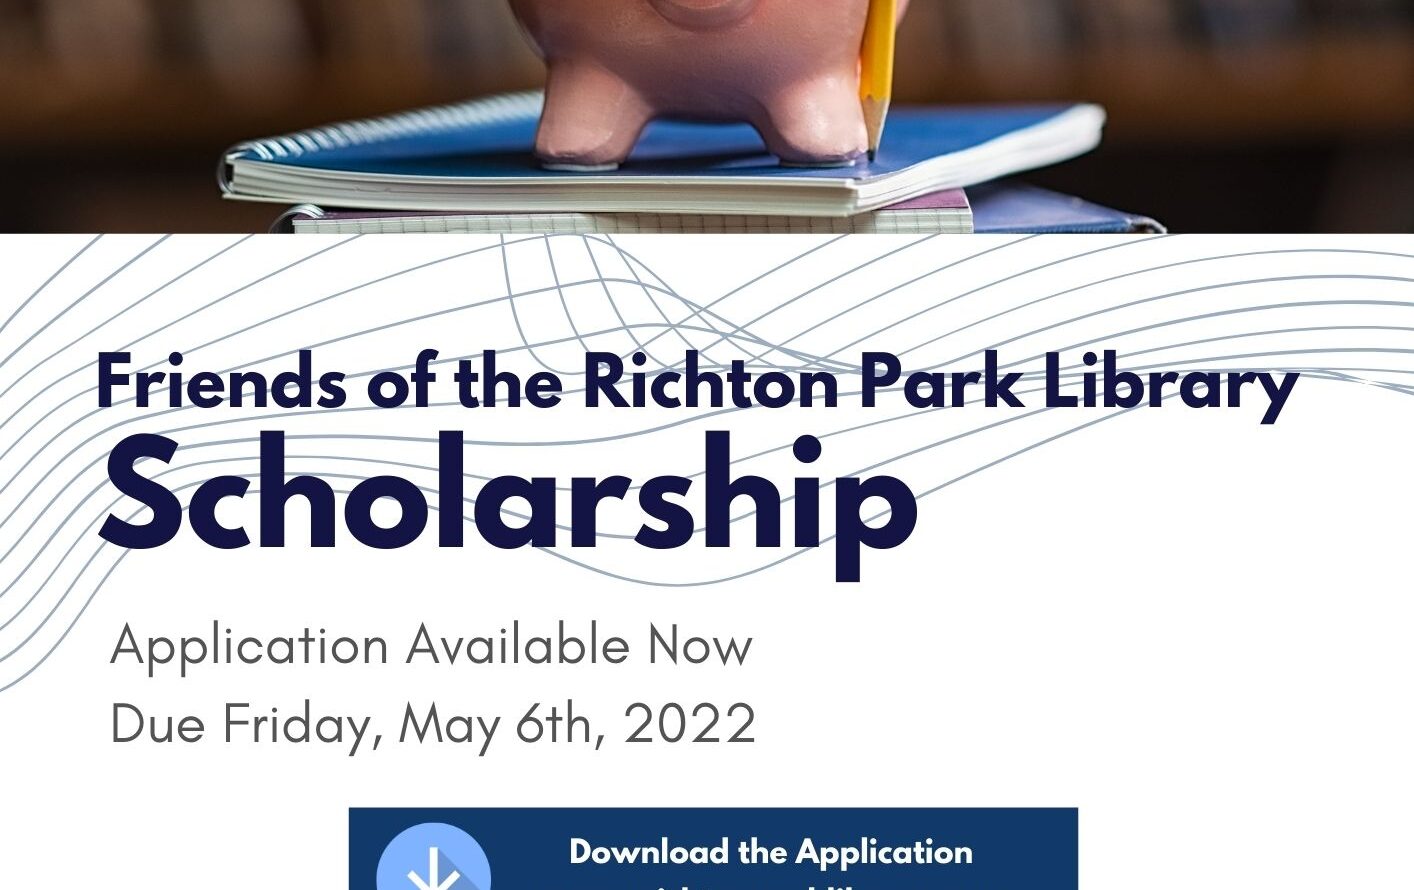 Friends of the Library Scholarship Applications Now Available Richton